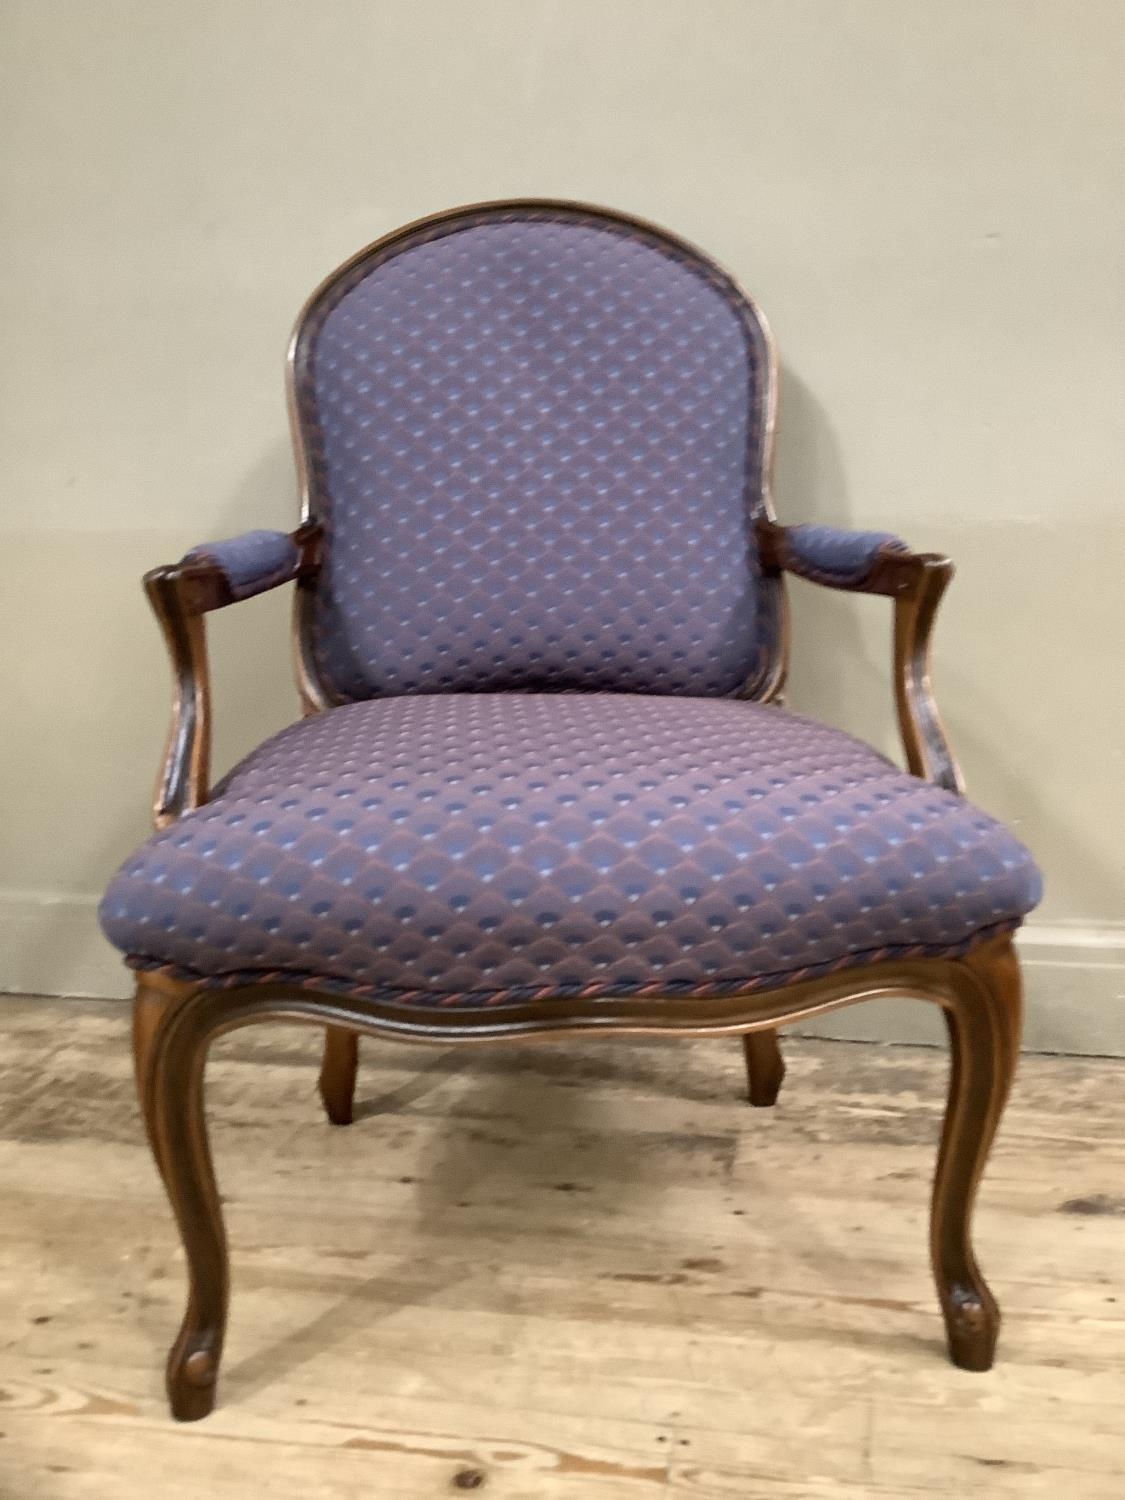 A reproduction French style open armchair on cabriole legs, upholstered in blue and orange scalloped - Image 2 of 5